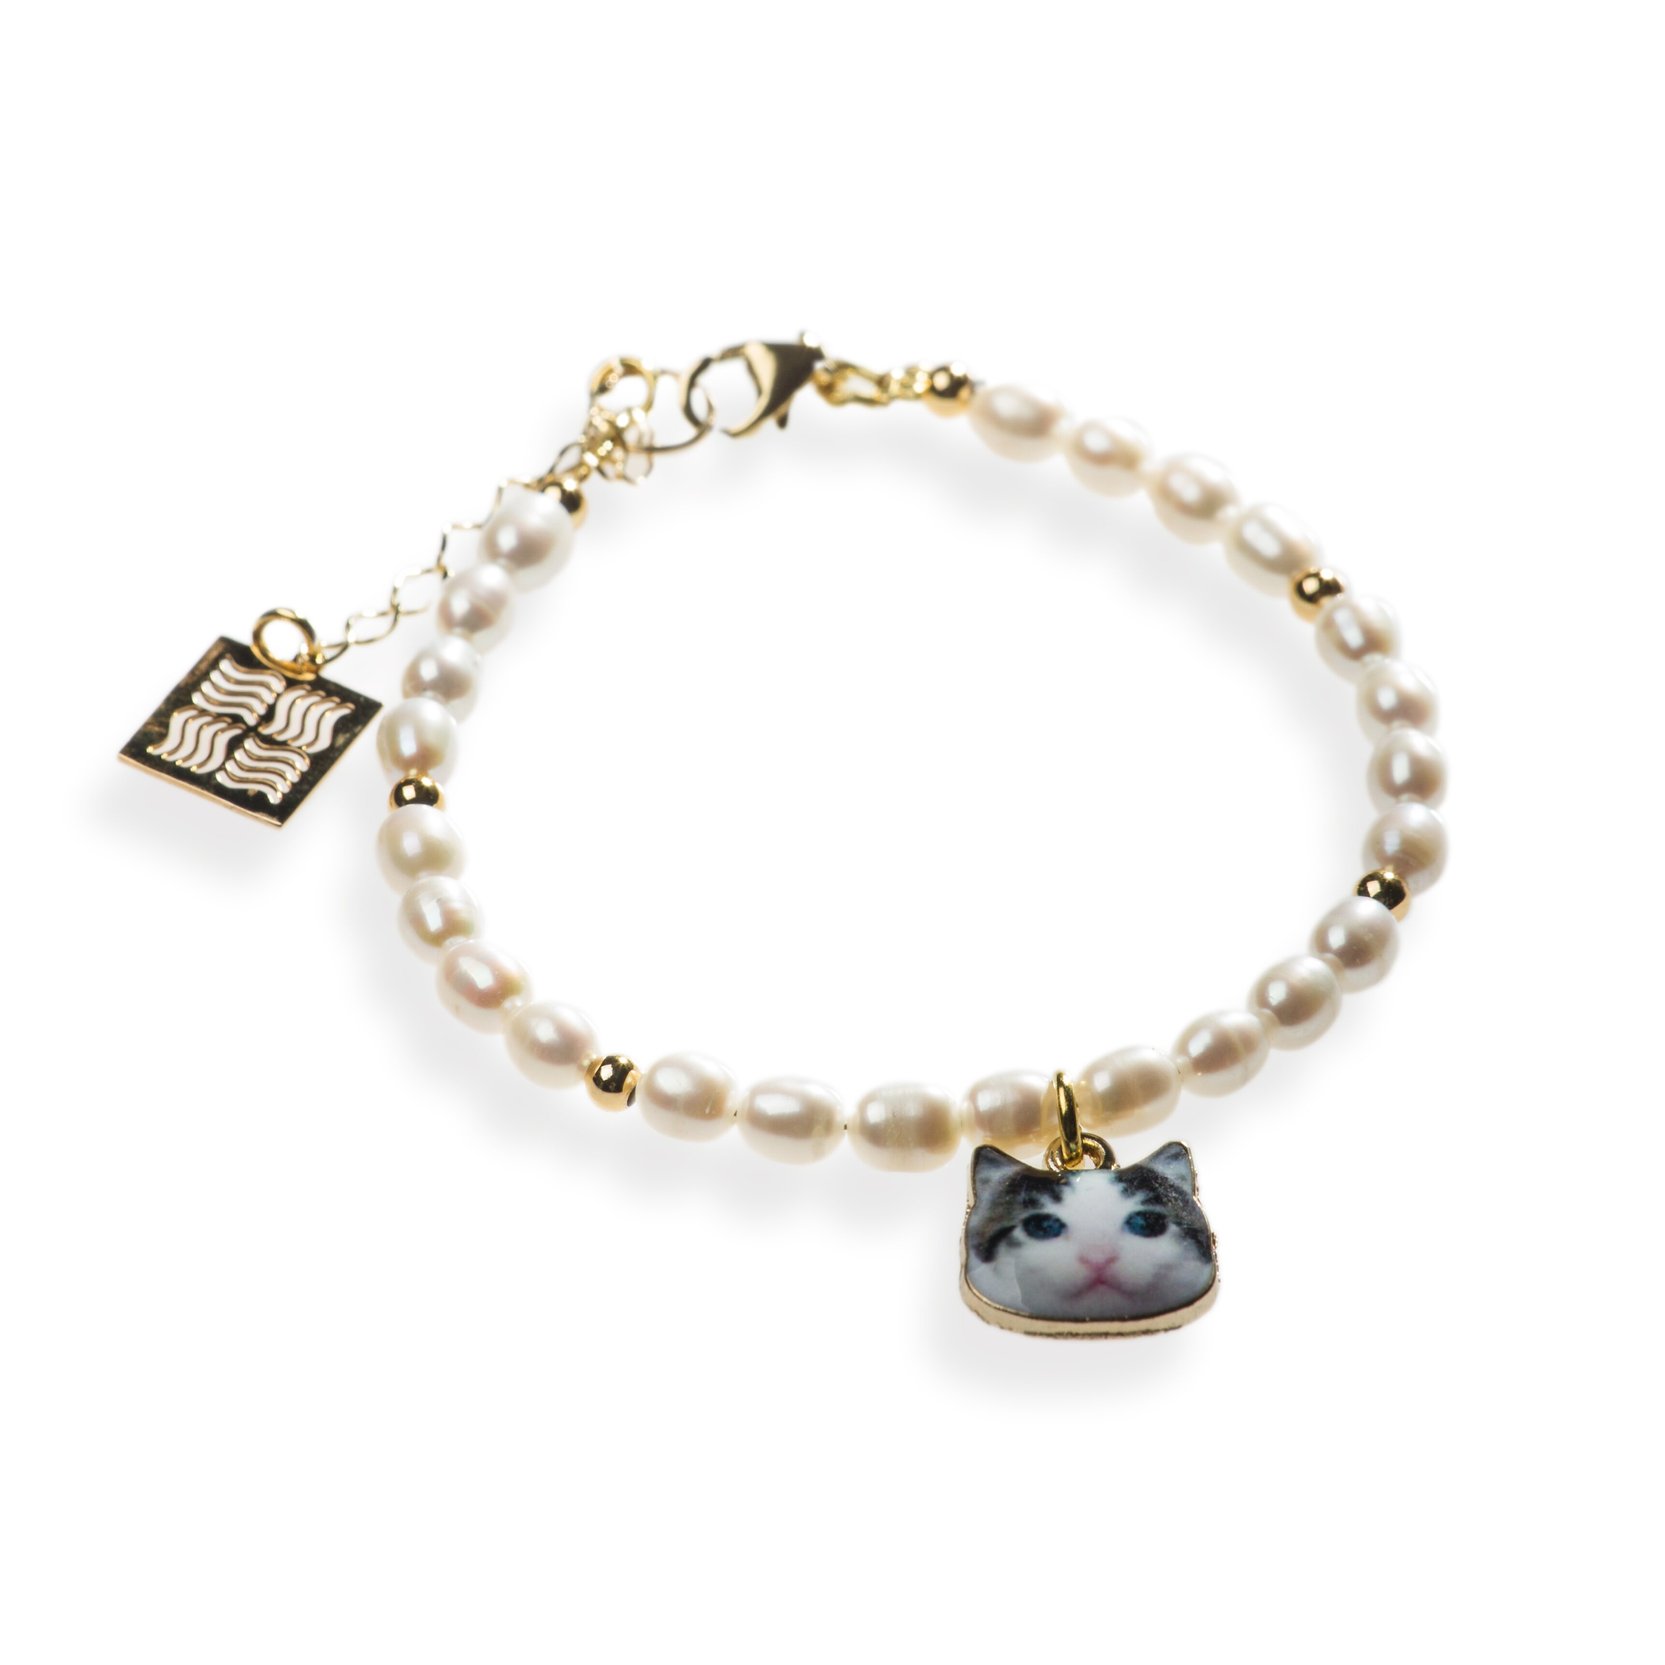 Pearl bracelet of the collection "Six Cats"